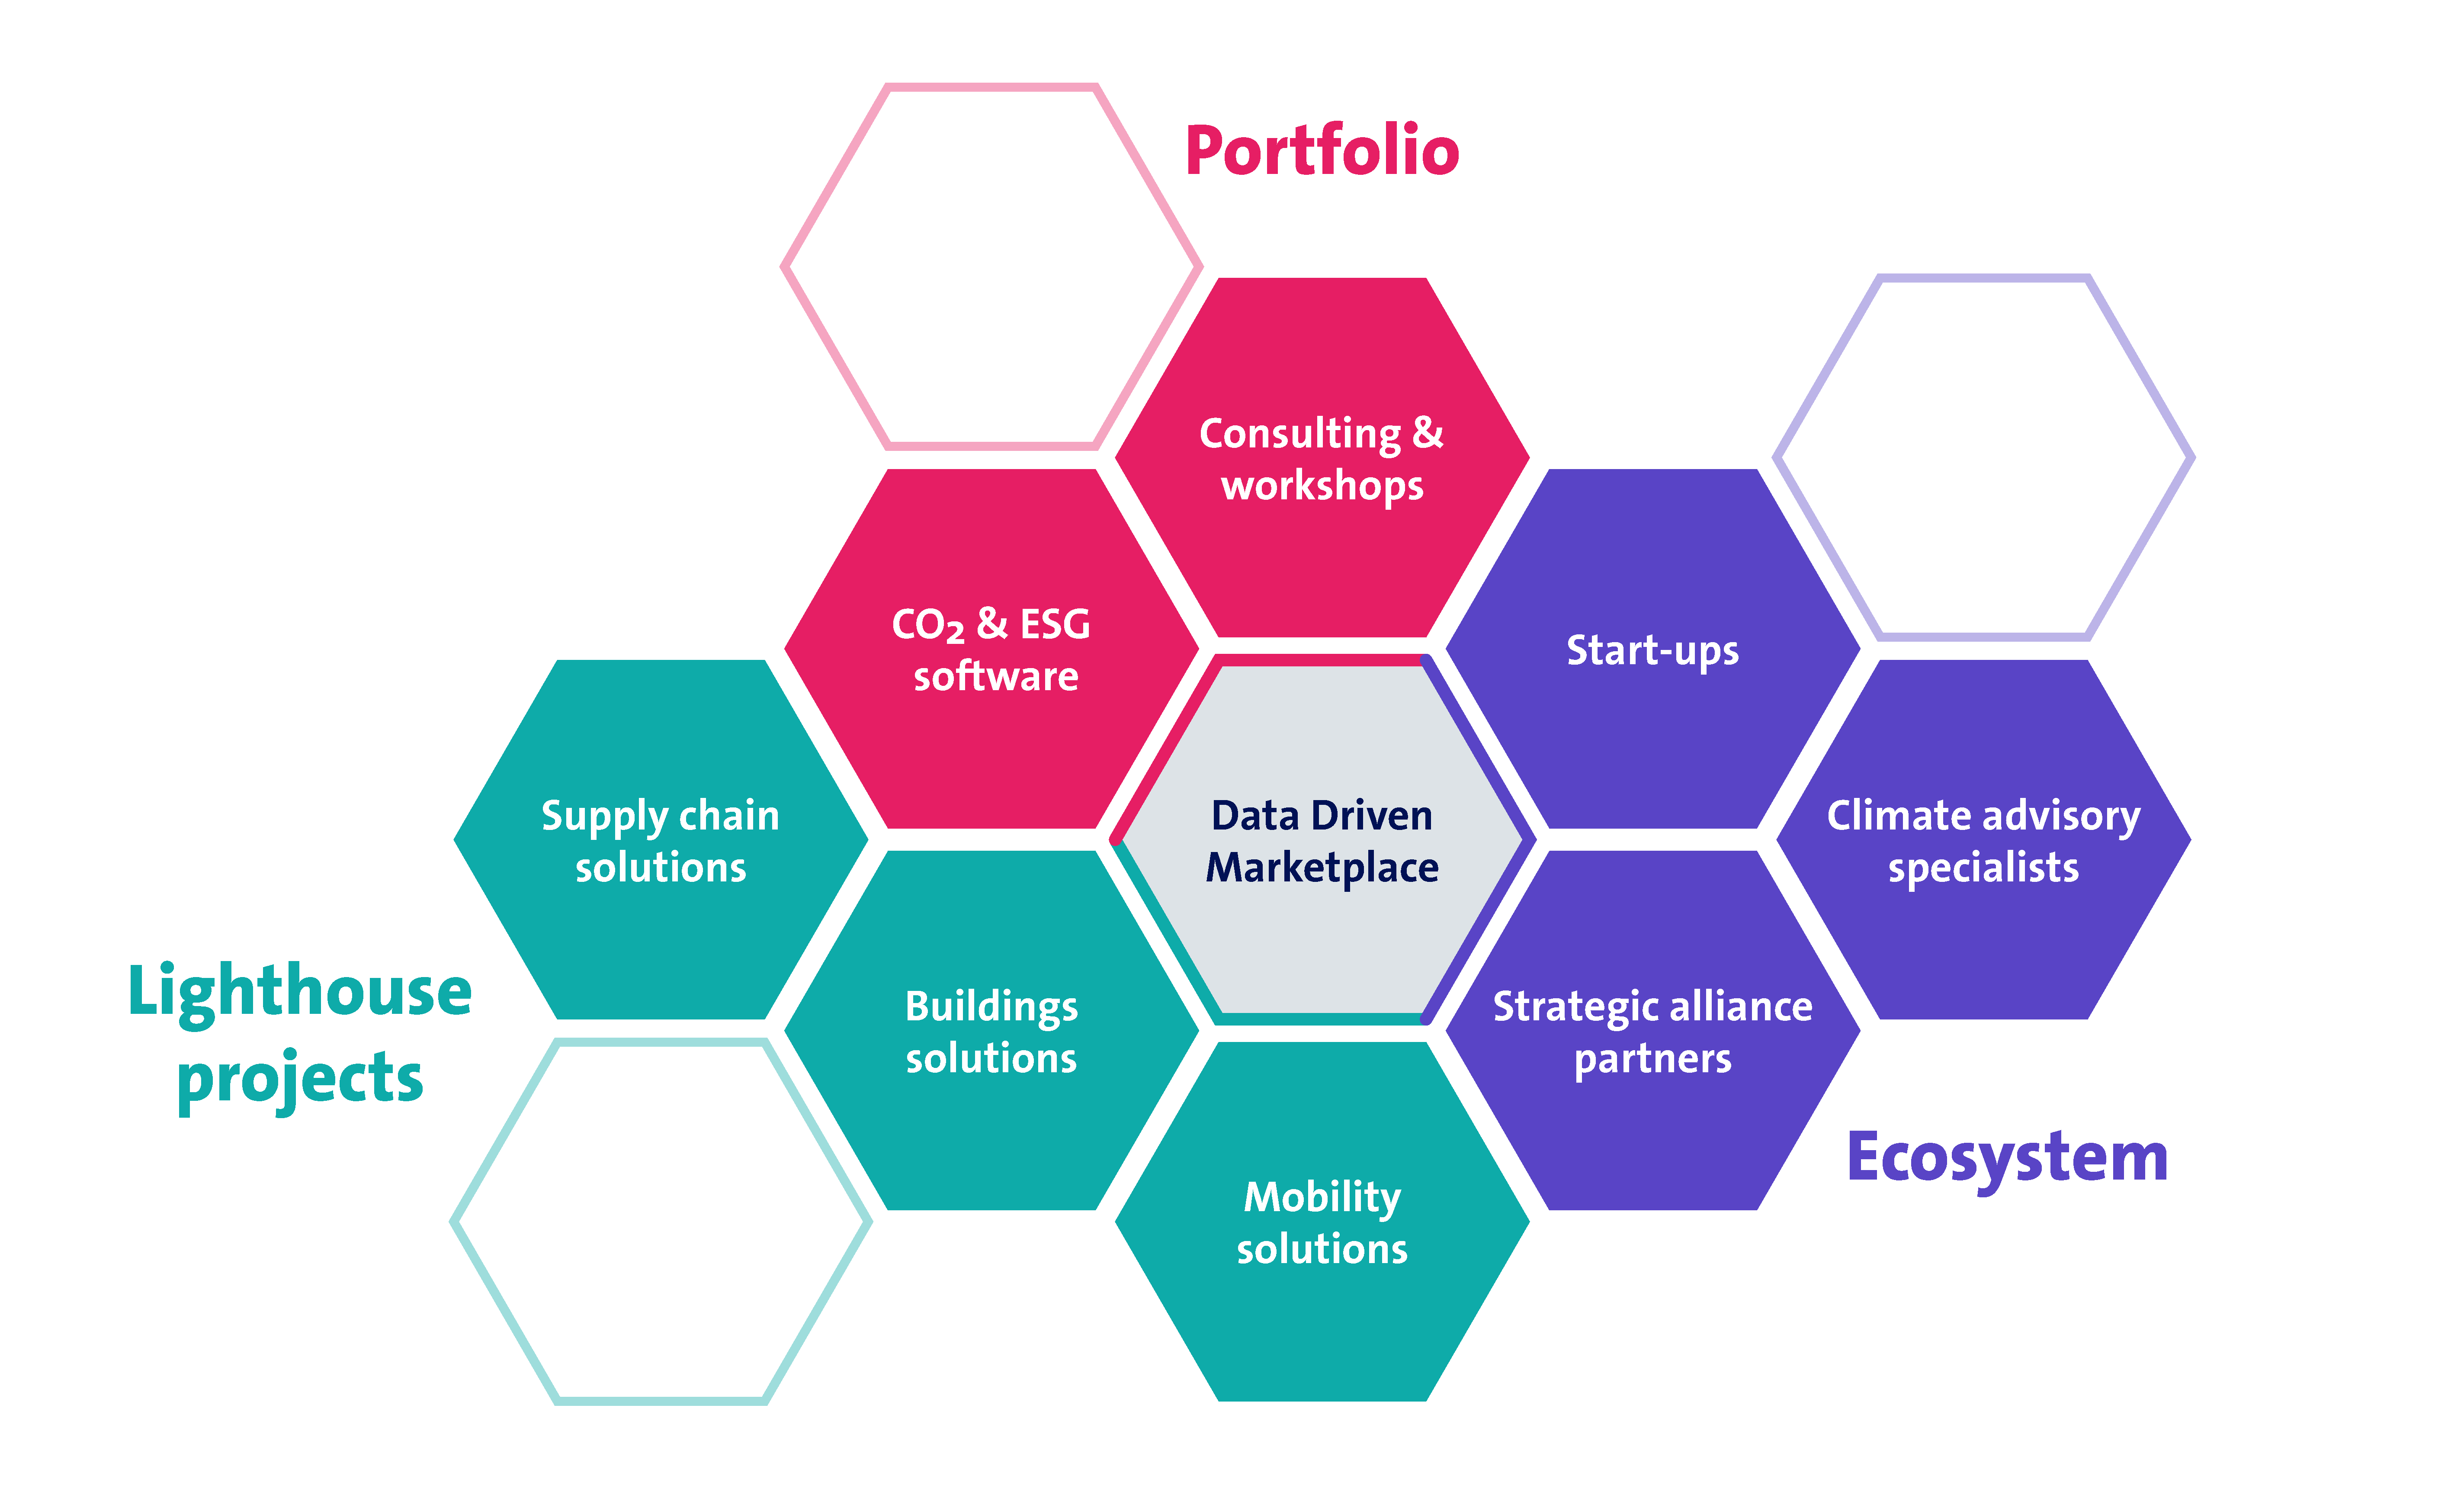 Our data-driven sustainability portfolio includes consulting and workshops plus evaluation and implementation of your software solution. We are continuously updating and optimising our offering.